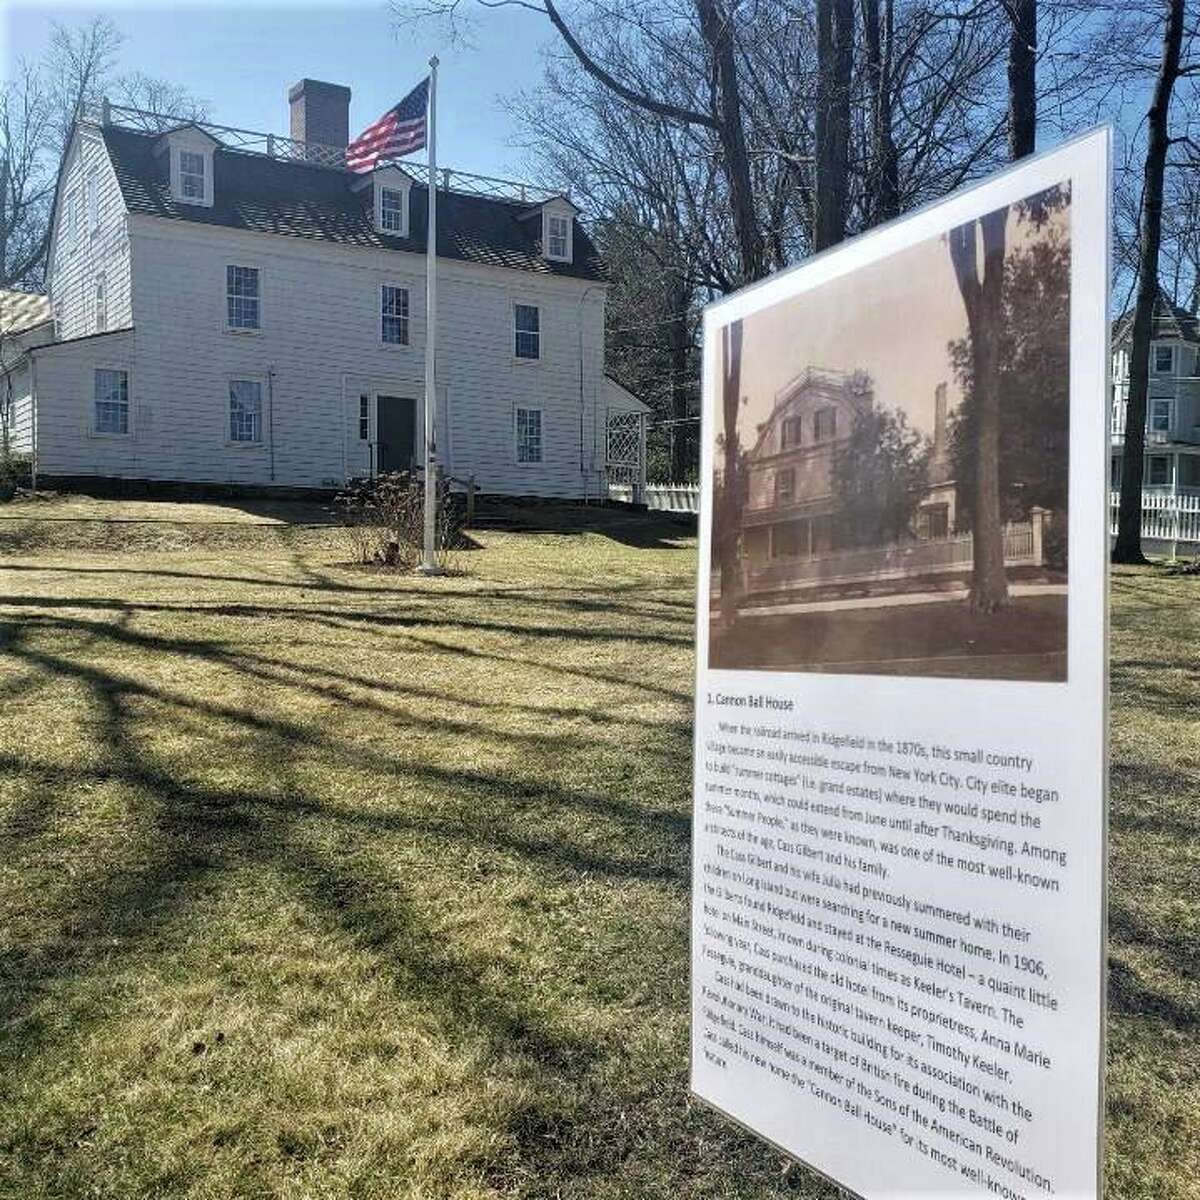 Here is information about what is happening in Ridgefield including a self-guided walking tour at the Keeler Tavern Museum and History Center.